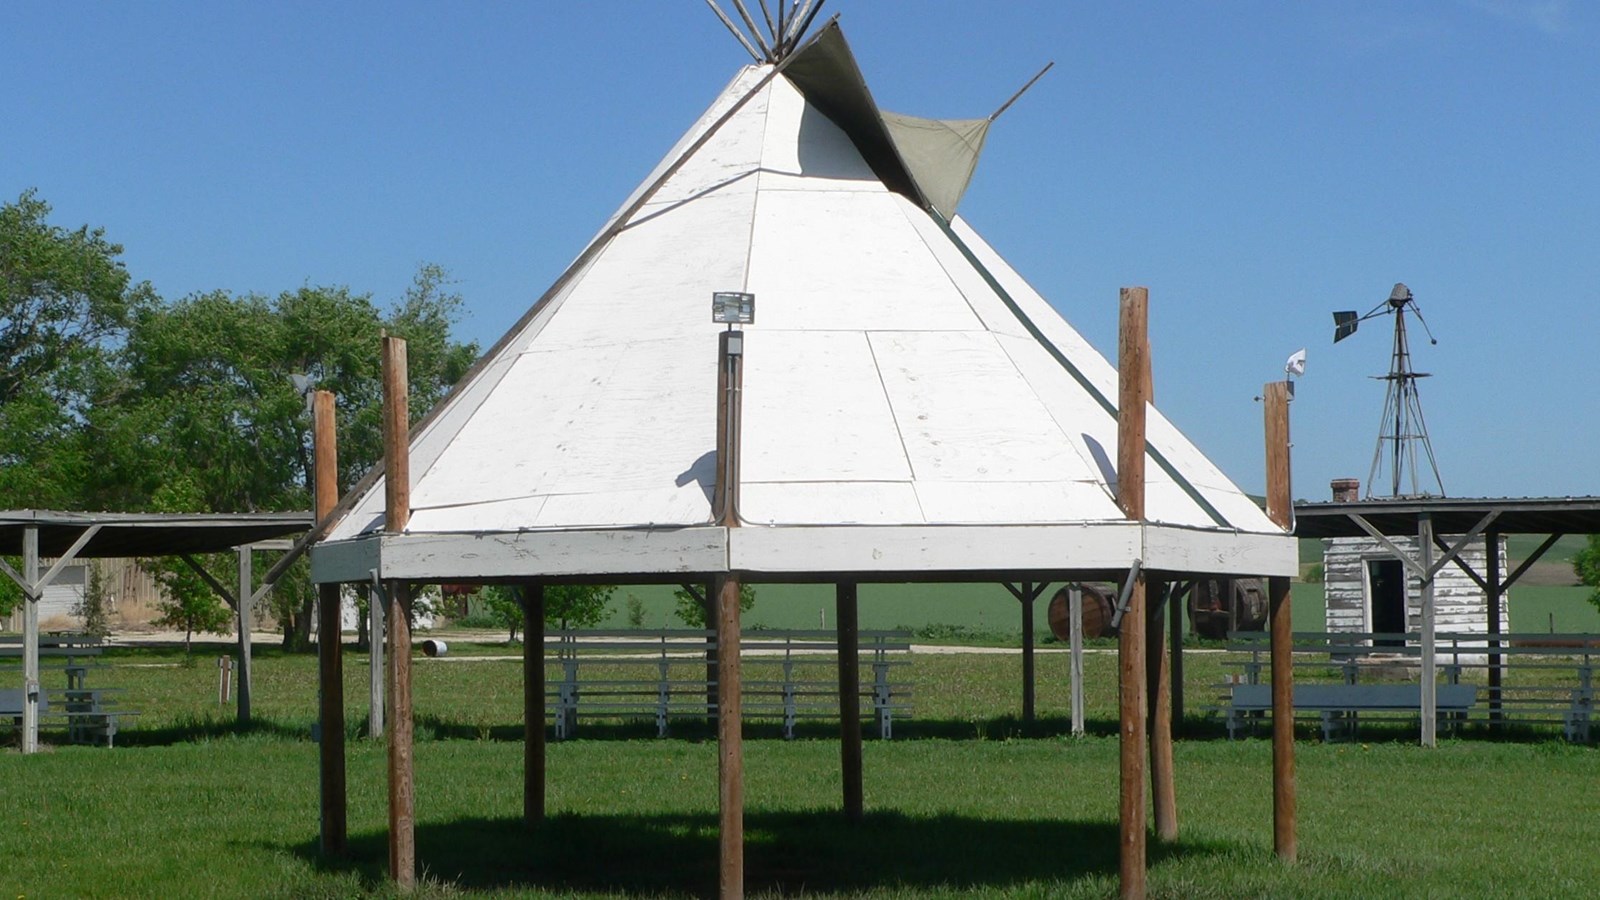 A circle of poles topped with a white peaked roof